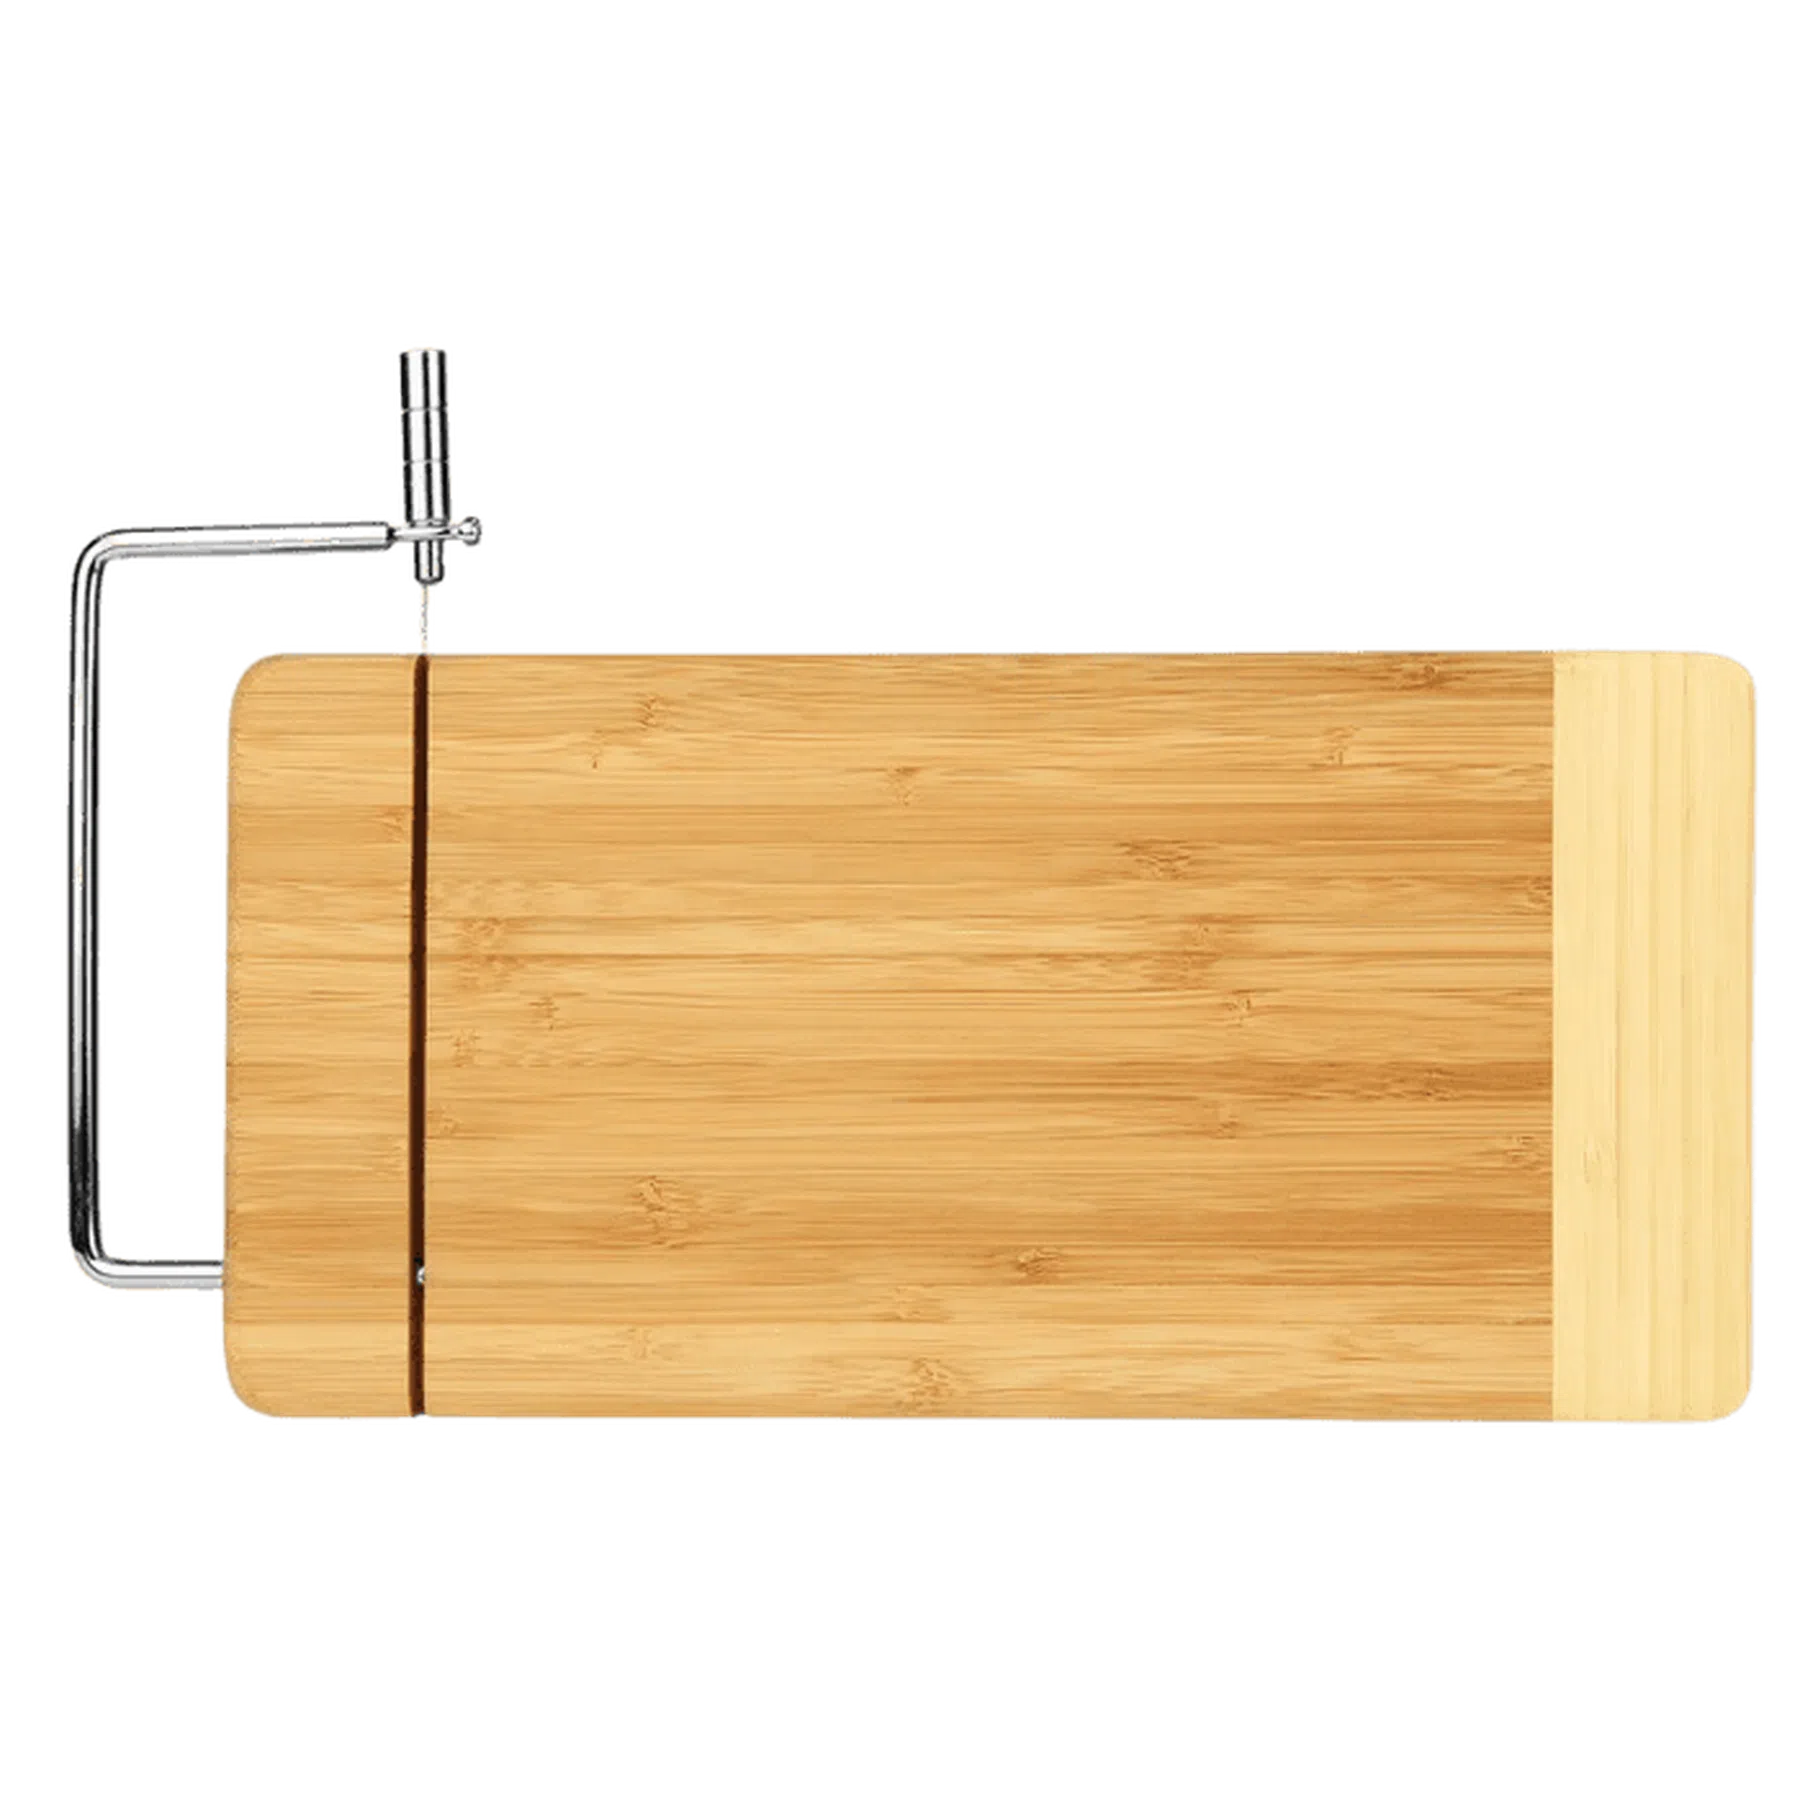 Genuine Bamboo Two-Tone Cutting Board with Metal Cheese Cutter